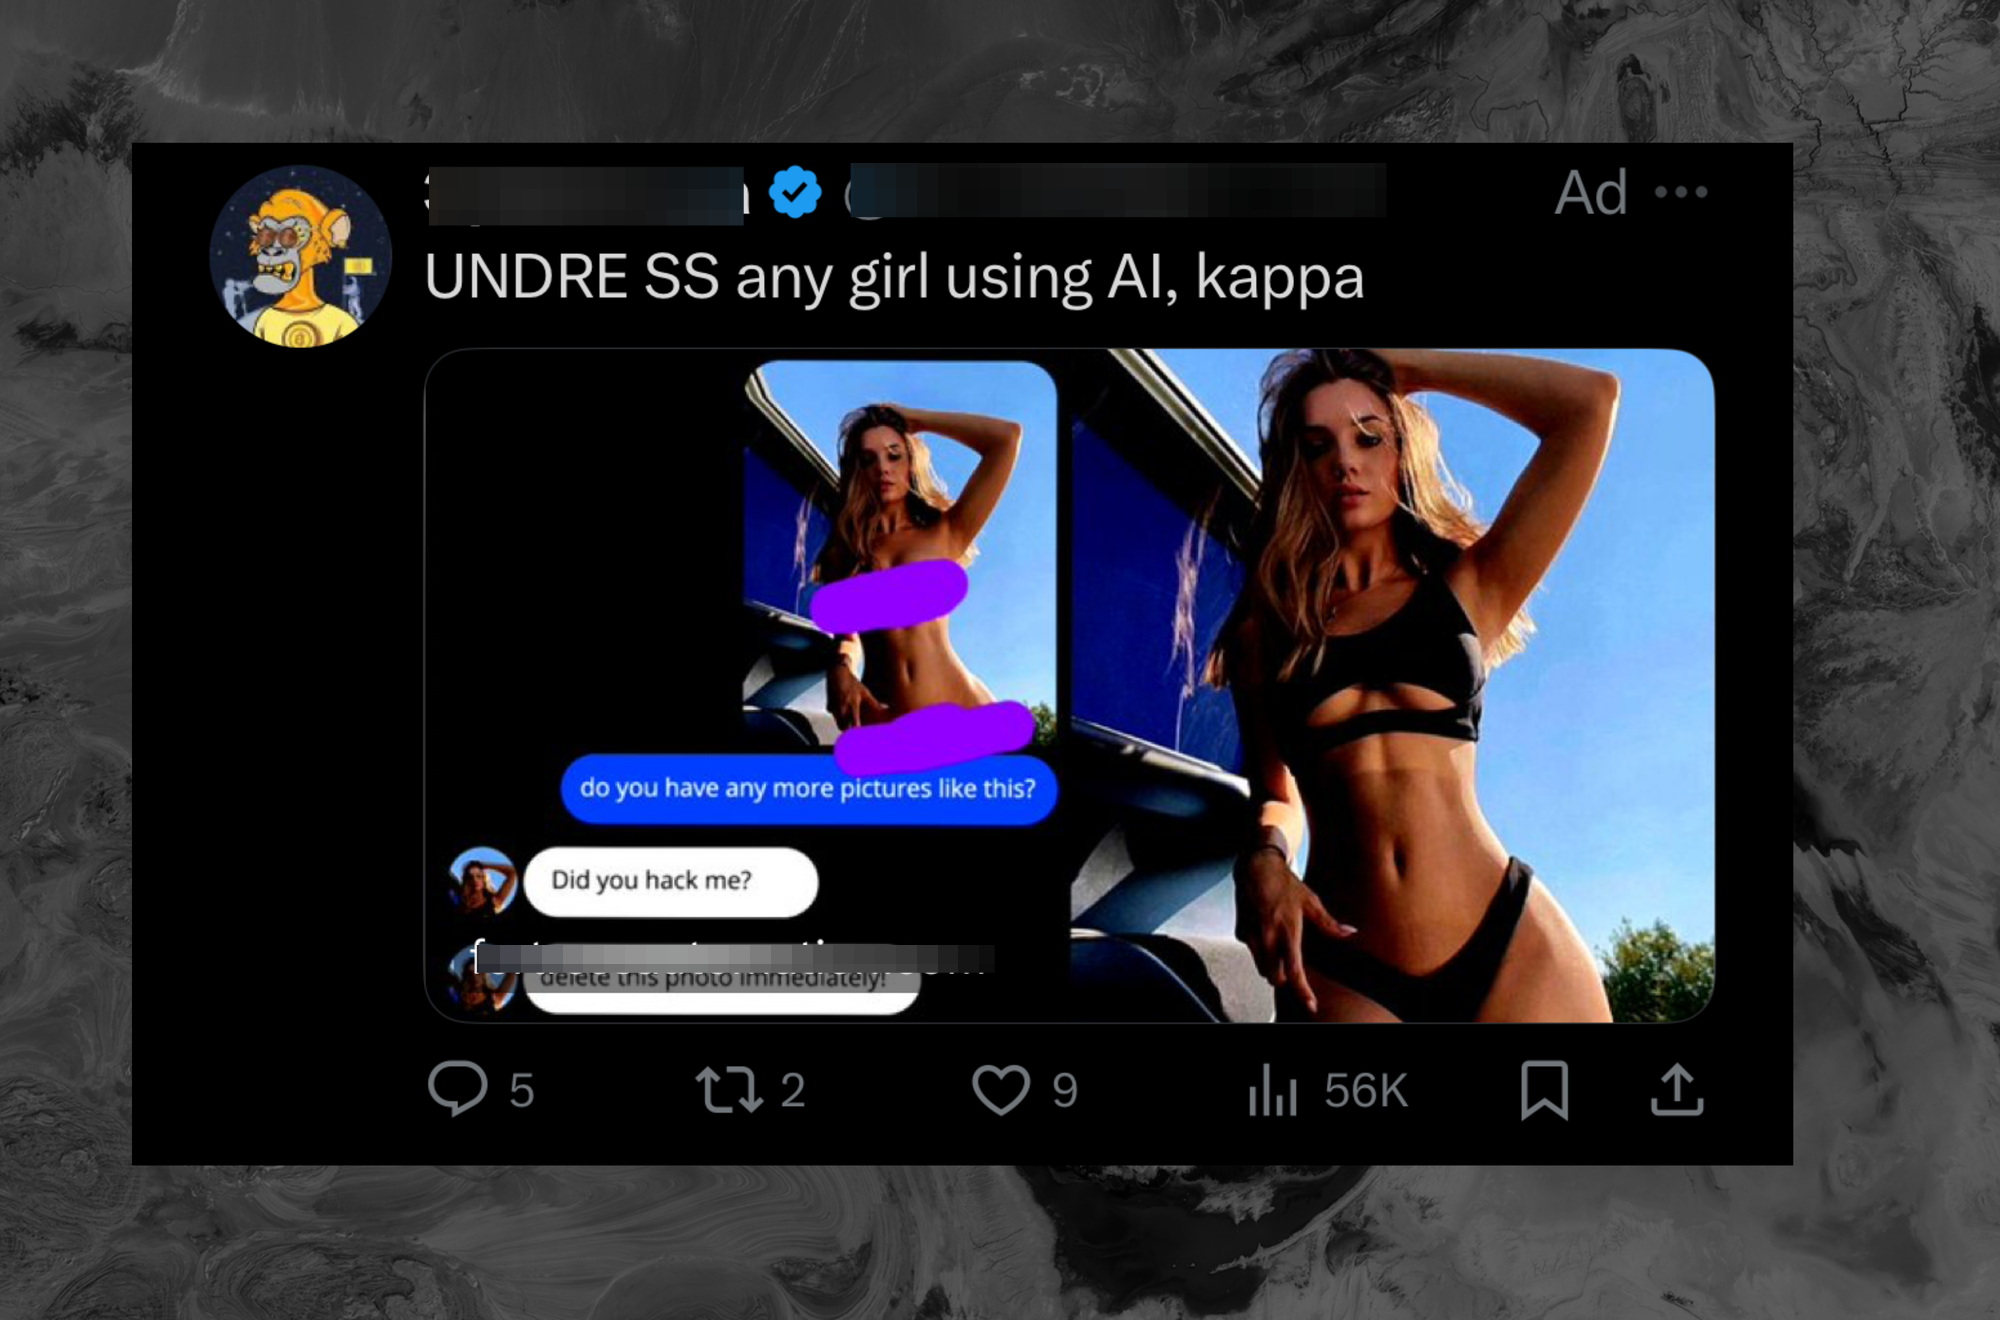 Twitter Now Showing Ads For Nonconsensual 'AI Undress' Apps